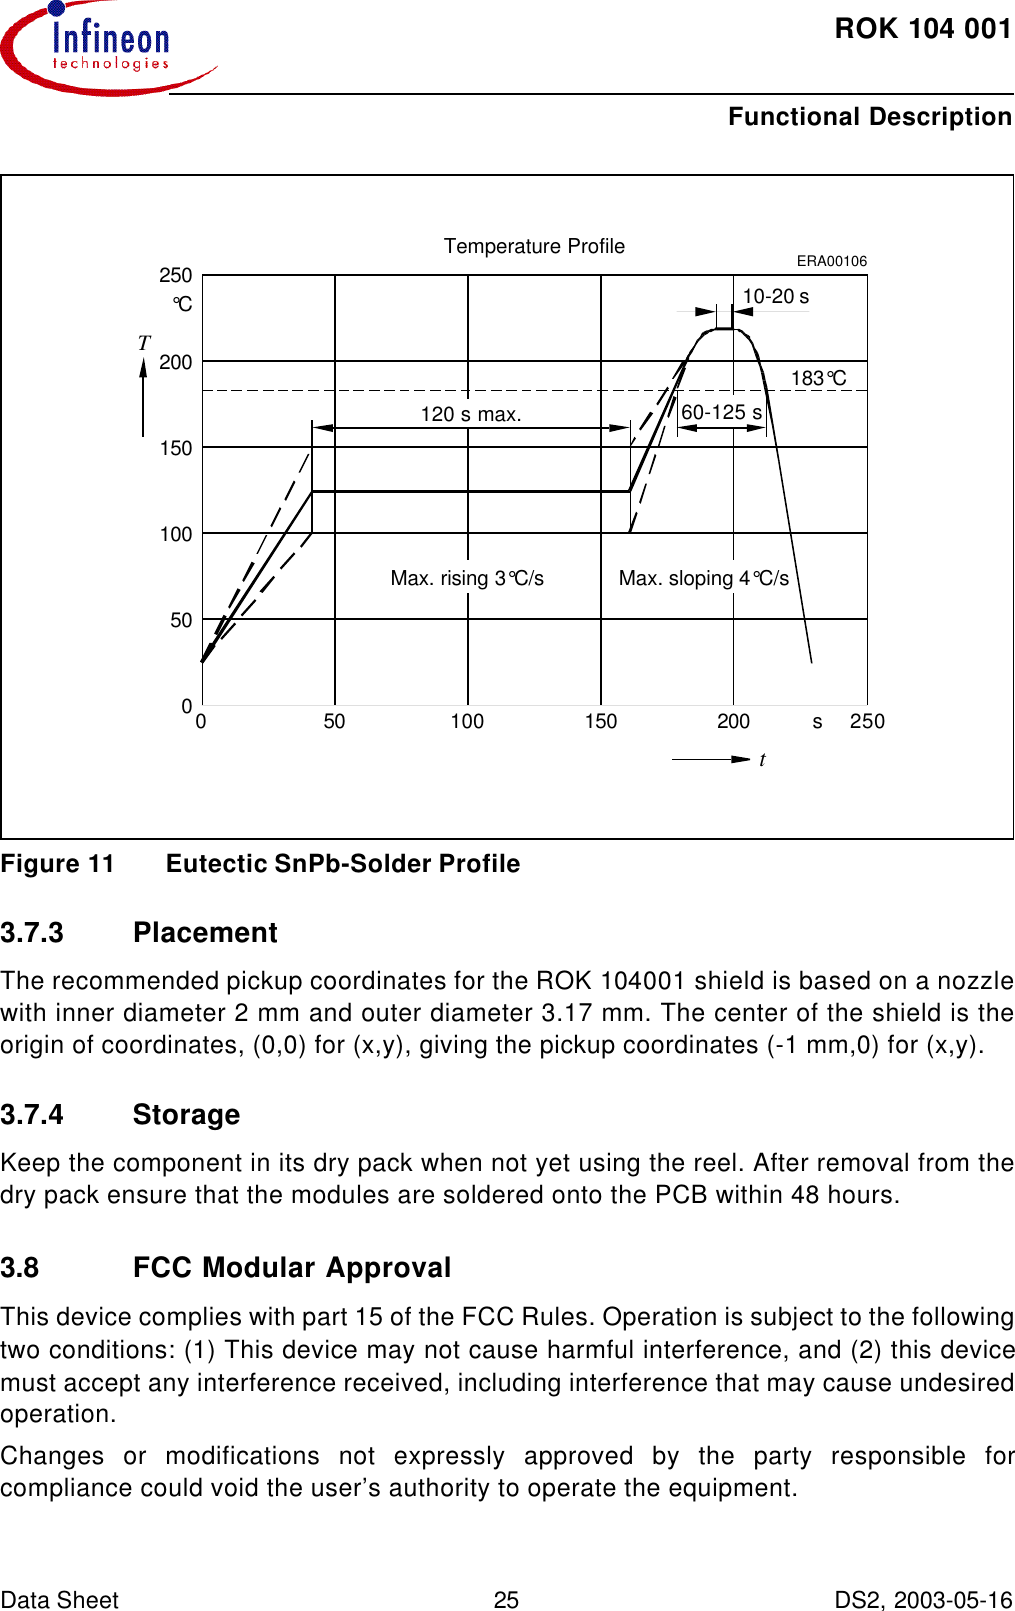 ROK104001Functional Description Data Sheet 25 DS2, 2003-05-16  Figure11 Eutectic SnPb-Solder Profile3.7.3 PlacementThe recommended pickup coordinates for the ROK104001 shield is based on a nozzlewith inner diameter 2 mm and outer diameter 3.17 mm. The center of the shield is theorigin of coordinates, (0,0) for (x,y), giving the pickup coordinates (-1 mm,0) for (x,y).3.7.4 StorageKeep the component in its dry pack when not yet using the reel. After removal from thedry pack ensure that the modules are soldered onto the PCB within 48 hours. 3.8 FCC Modular ApprovalThis device complies with part 15 of the FCC Rules. Operation is subject to the followingtwo conditions: (1) This device may not cause harmful interference, and (2) this devicemust accept any interference received, including interference that may cause undesiredoperation.Changes or modifications not expressly approved by the party responsible forcompliance could void the user’s authority to operate the equipment.ERA00106120 s max.0050 100 150 200 25050100150200250stT°C183°C60-125 s10-20 sMax. rising 3°C/s Max. sloping 4°C/sTemperature Profile